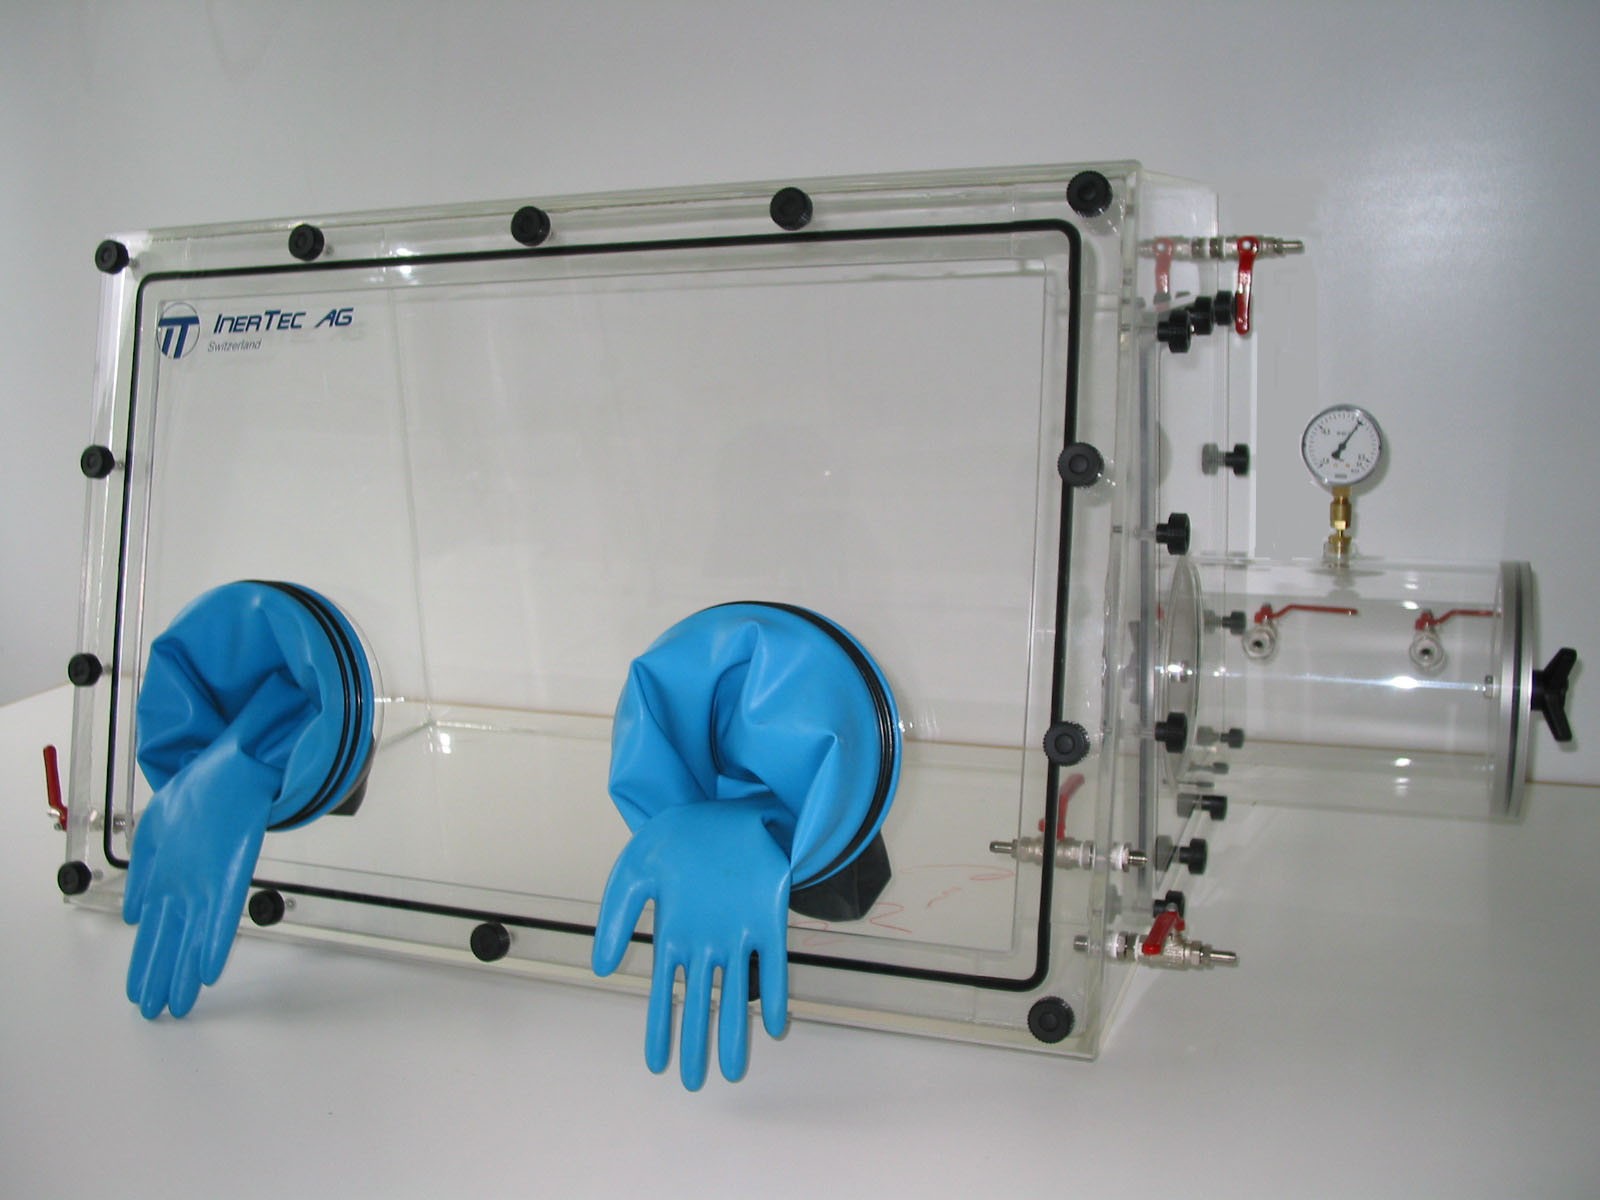 Glovebox made of acrylic&gt; Gas filling: by hand, front design: standard, side design: removable flange Control: oxygen and humidity display